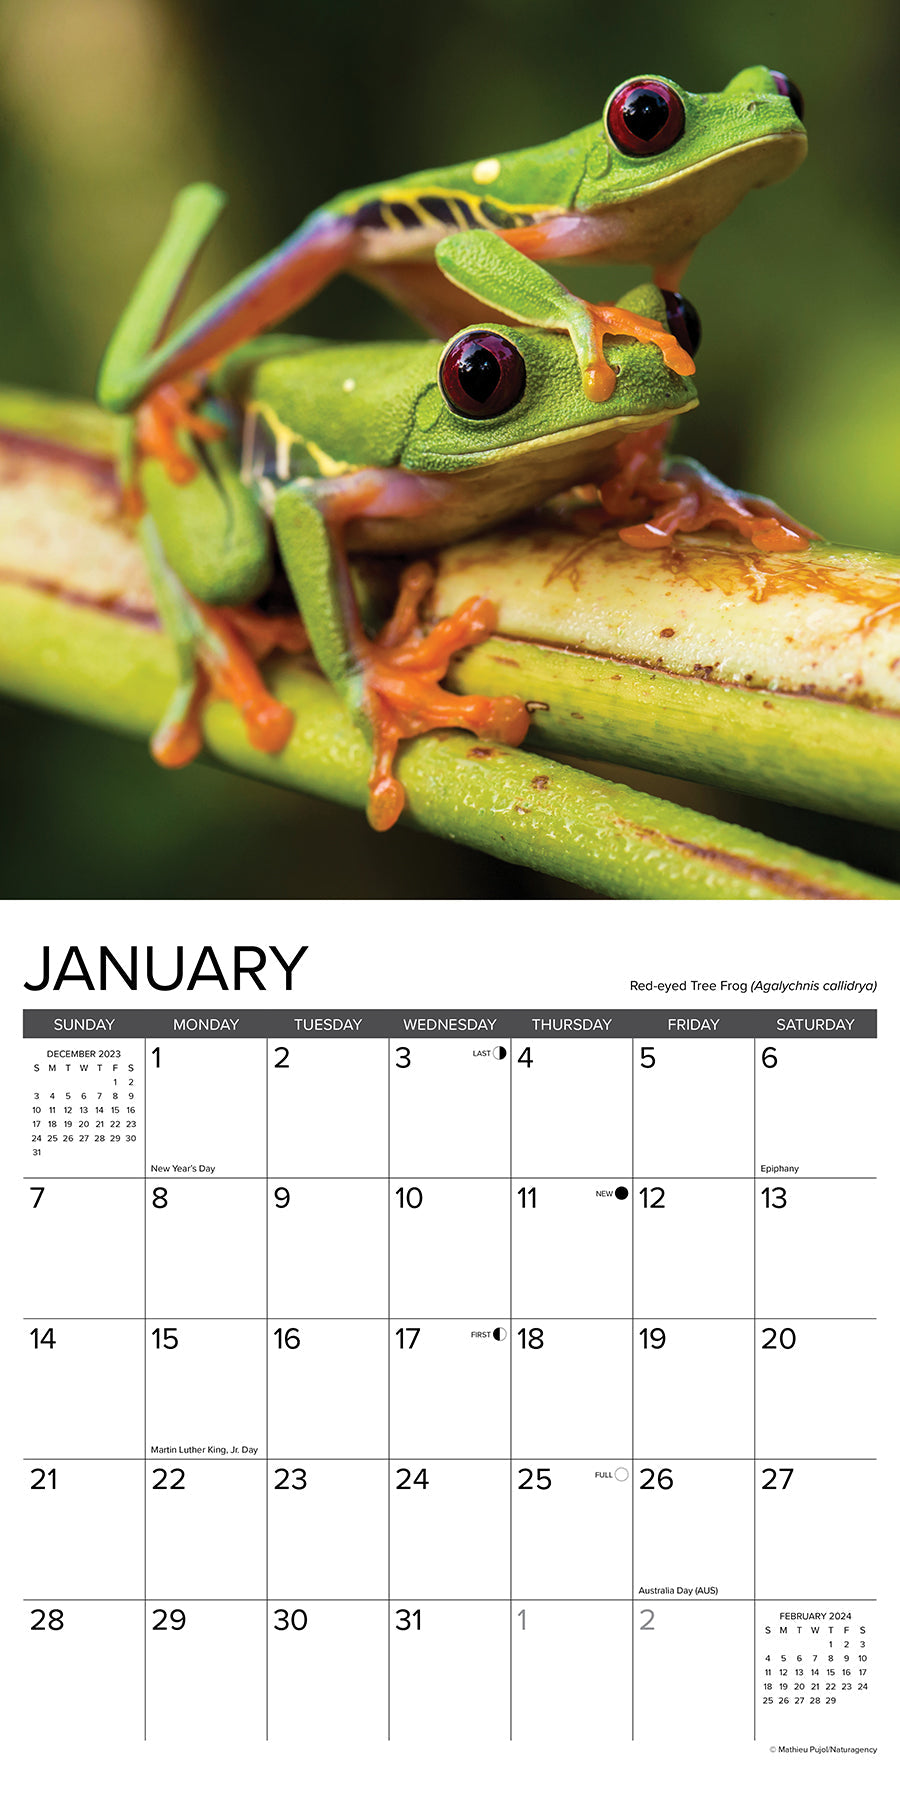 2024 Just Frogs - Square Wall Calendar